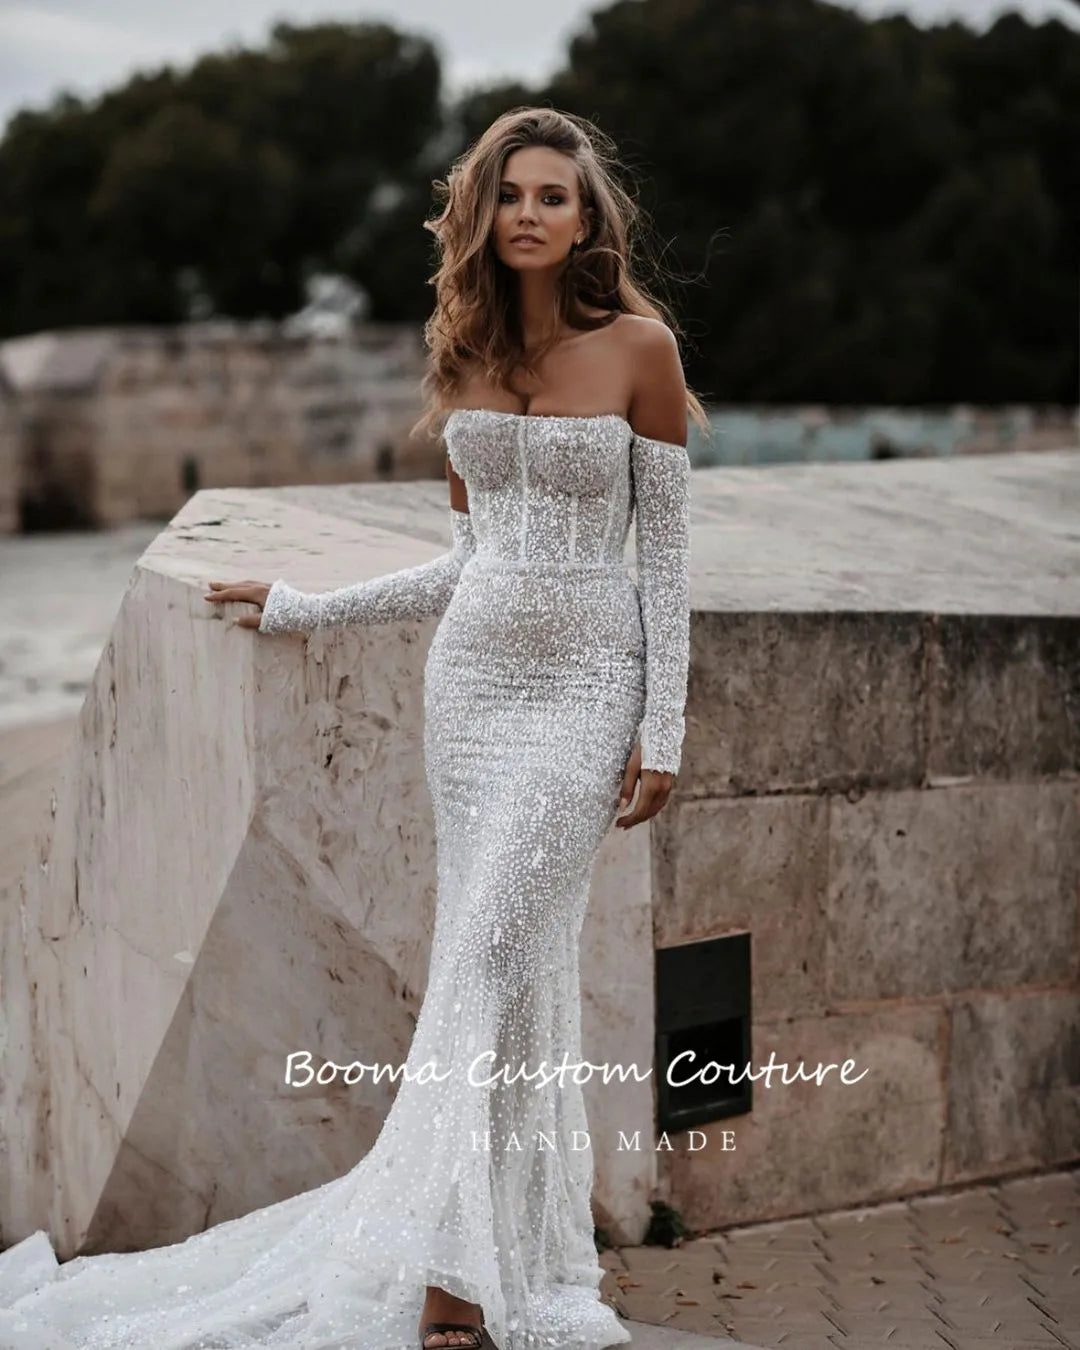 Strapless Sequin Lace Mermaid Wedding Dresses Off Shoulder Long Sleeves Beaded Trumpet Bridal Gowns Open Back Bride Dress